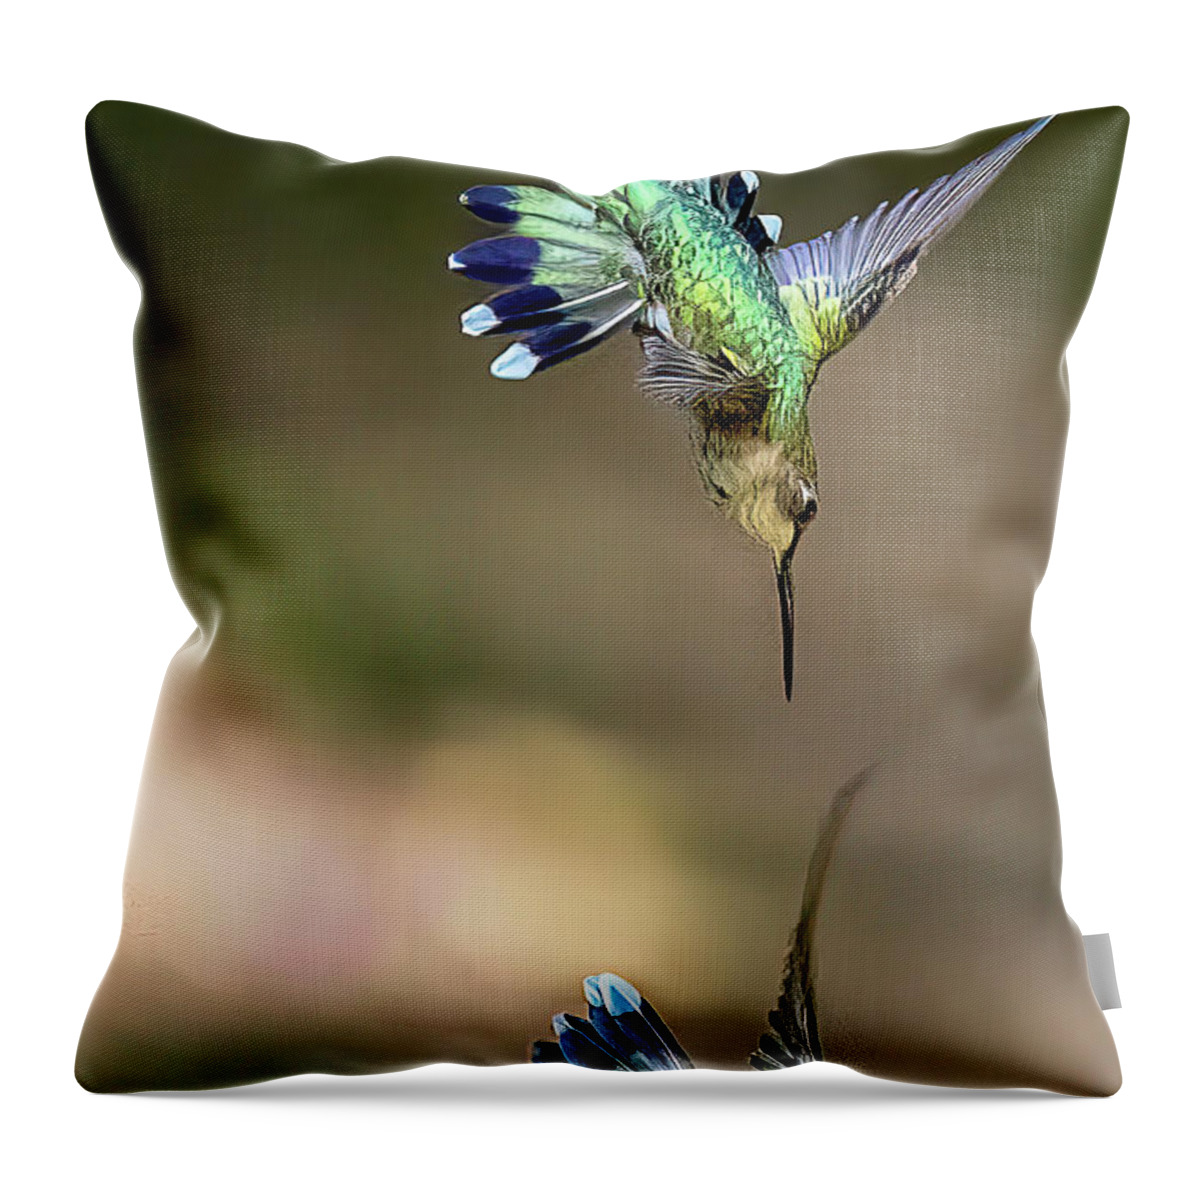 Hummingbirds Throw Pillow featuring the photograph The Battle by Norman Peay